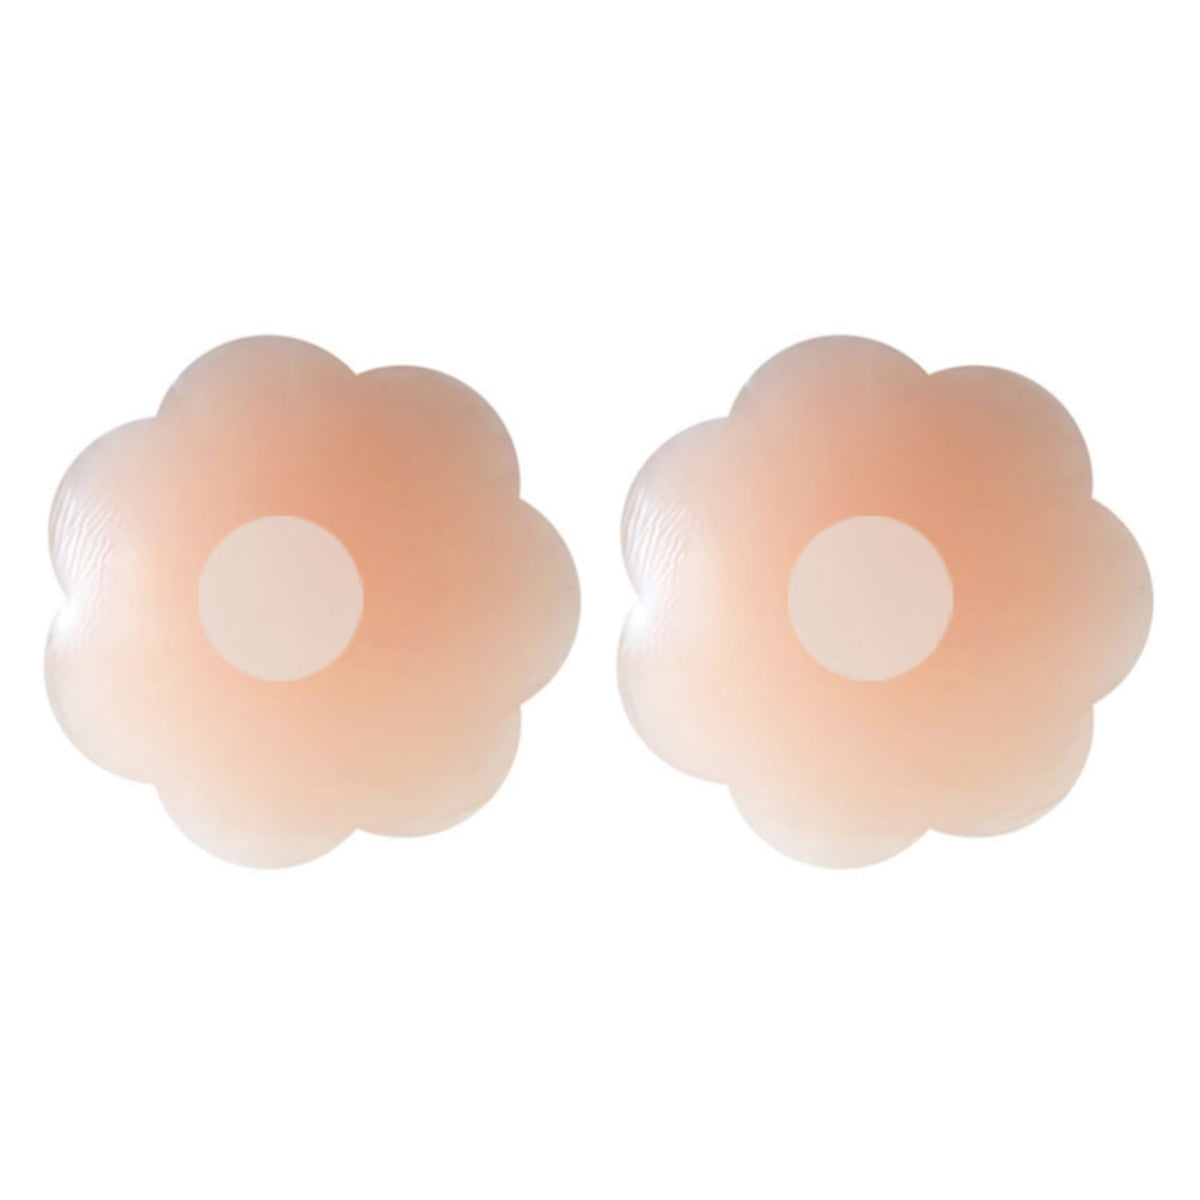 Reusable silicon nipple cover Accessories LOVEFREYA Flower Nude 